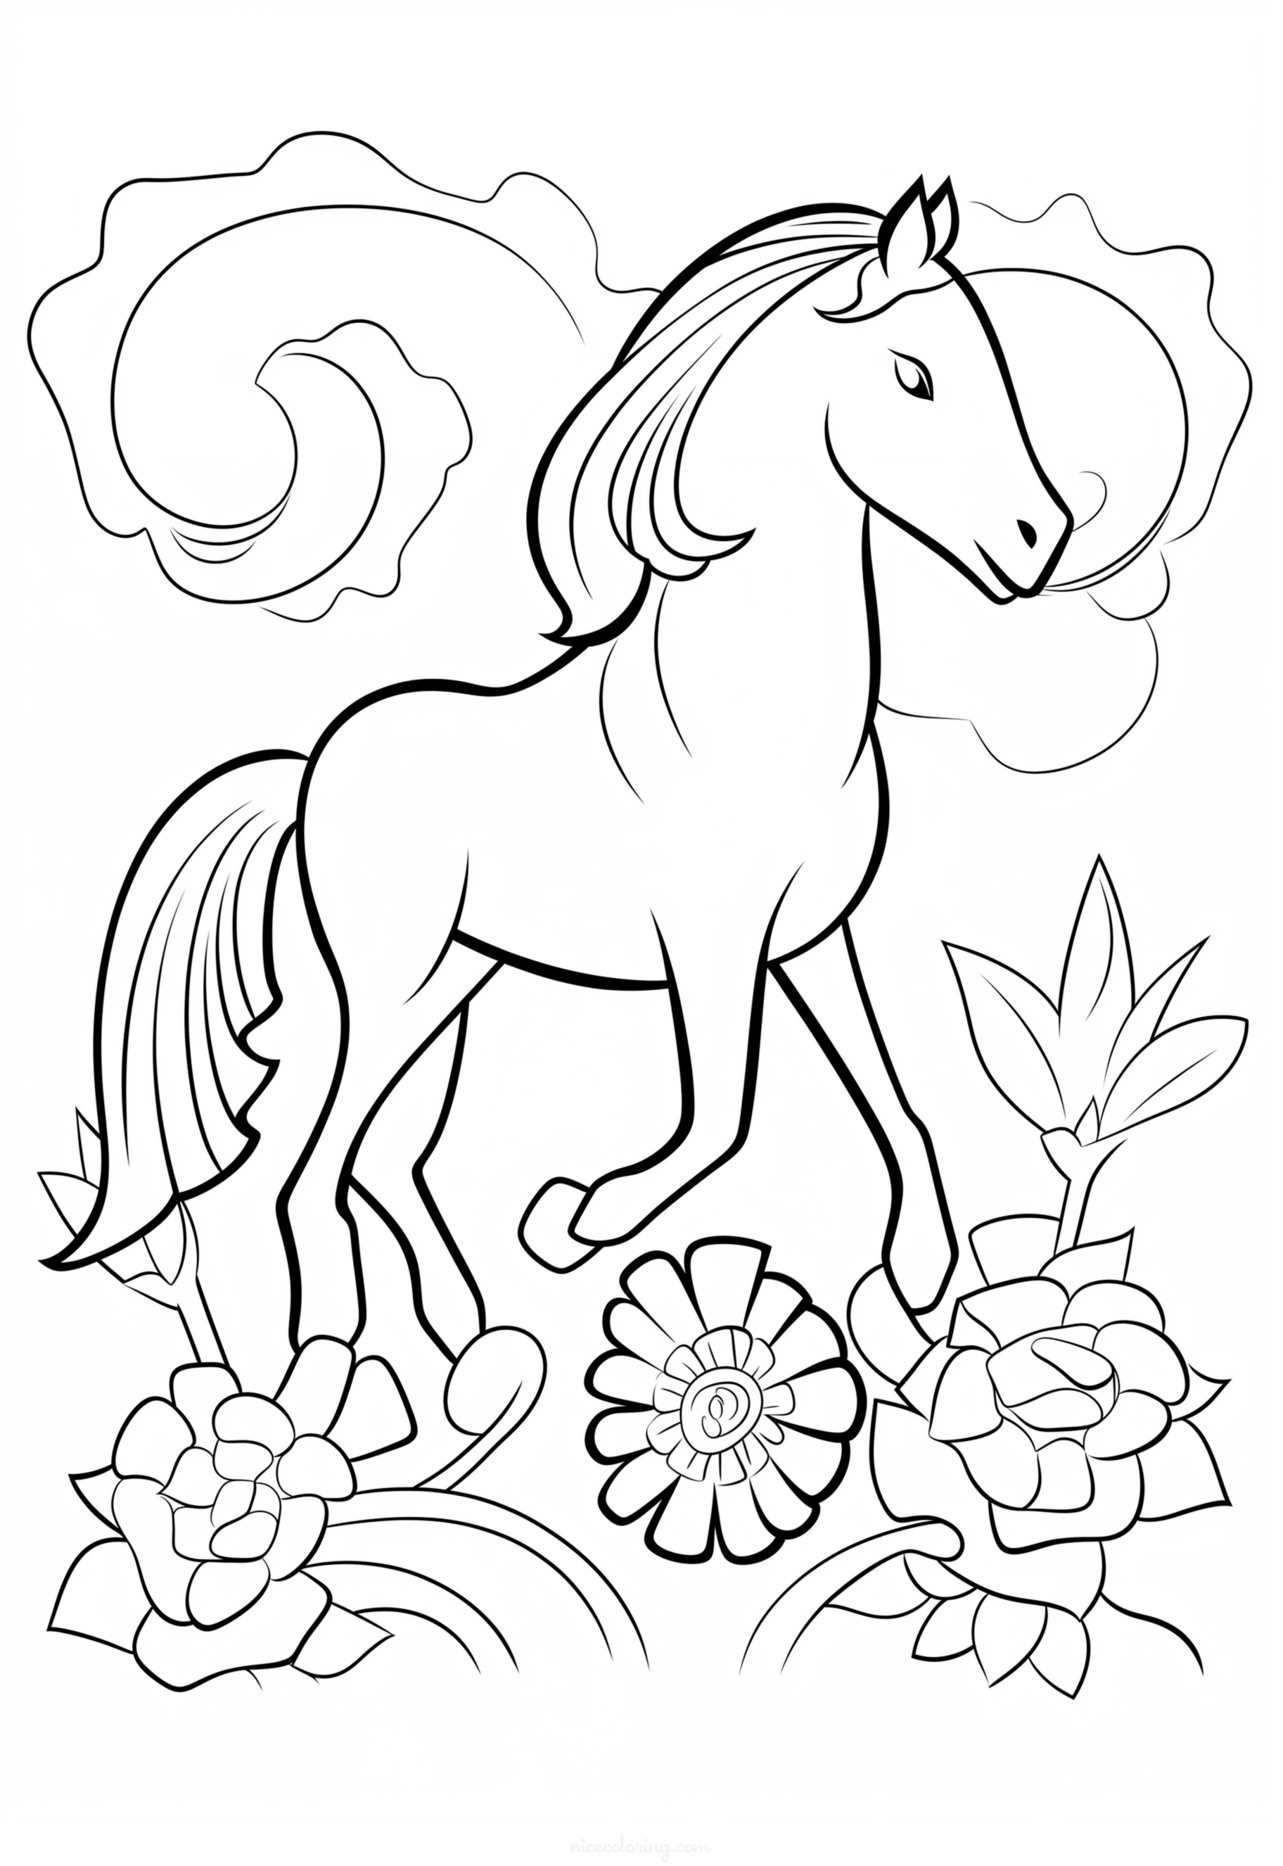 Horse standing in a field coloring